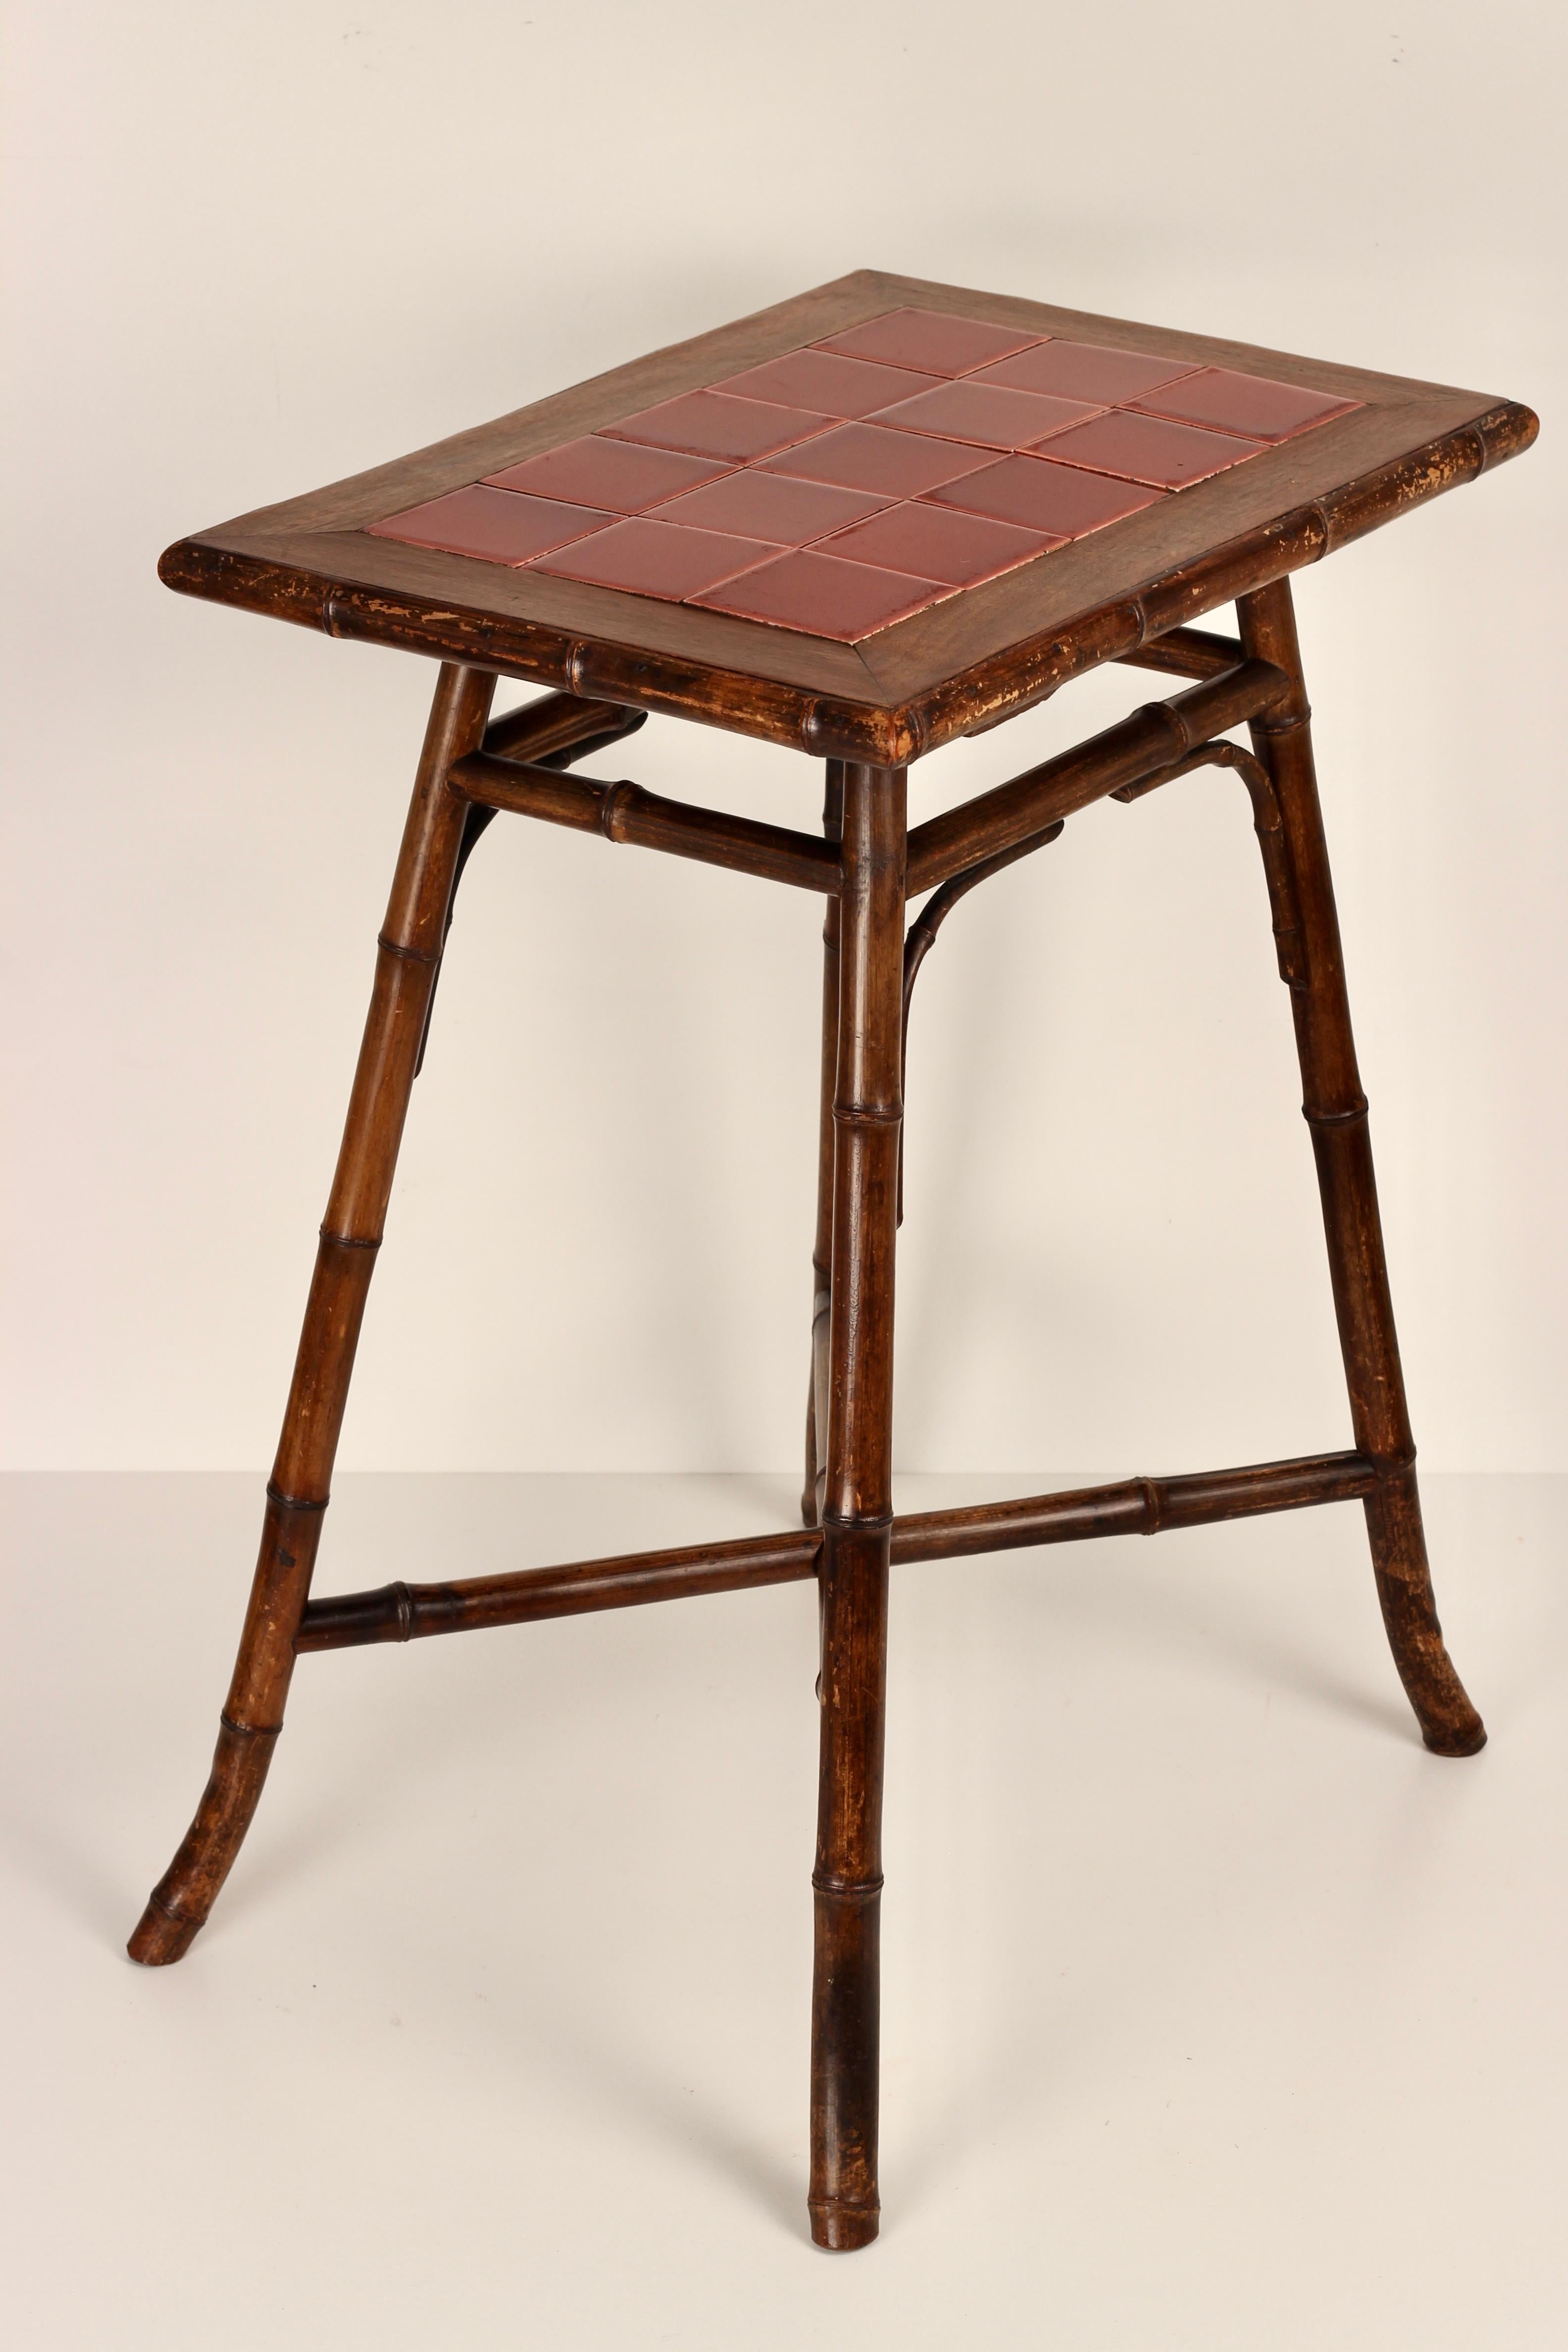 Late 19th Century Boho Chic Steam Bent Bamboo Side Table with Deep Red Ceramic Tiled Top 1890’s For Sale